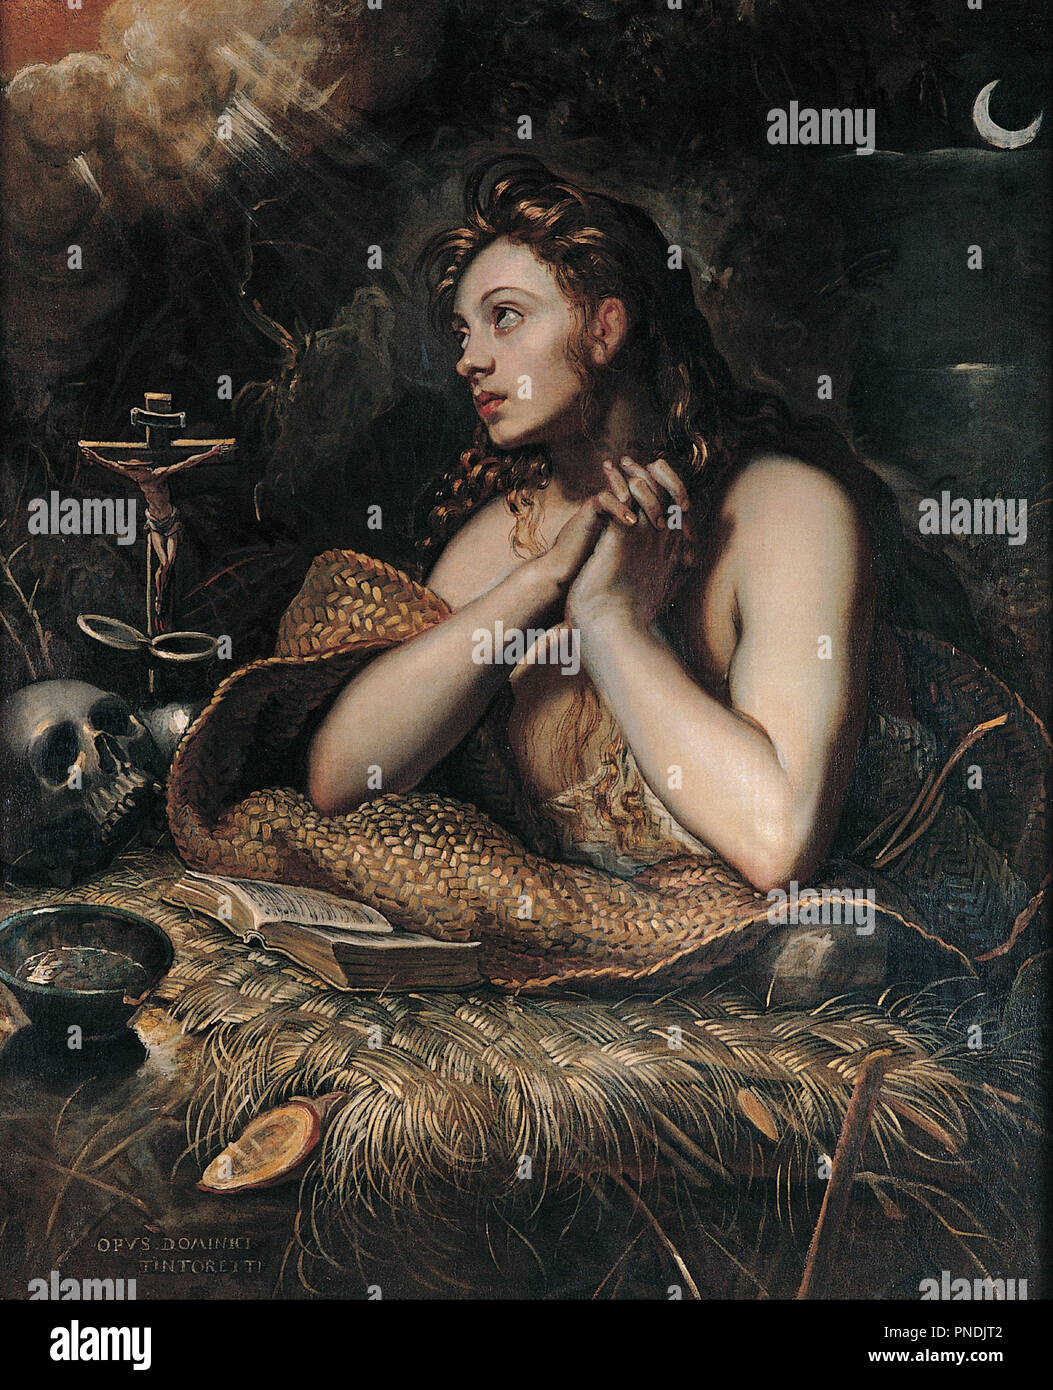 Penitent Magdalene. Date/Period: Between 1598 and 1602. Painting. Oil on canvas. Author: DOMENICO TINTORETTO. Tintoretto (Domenico R. ). Stock Photo